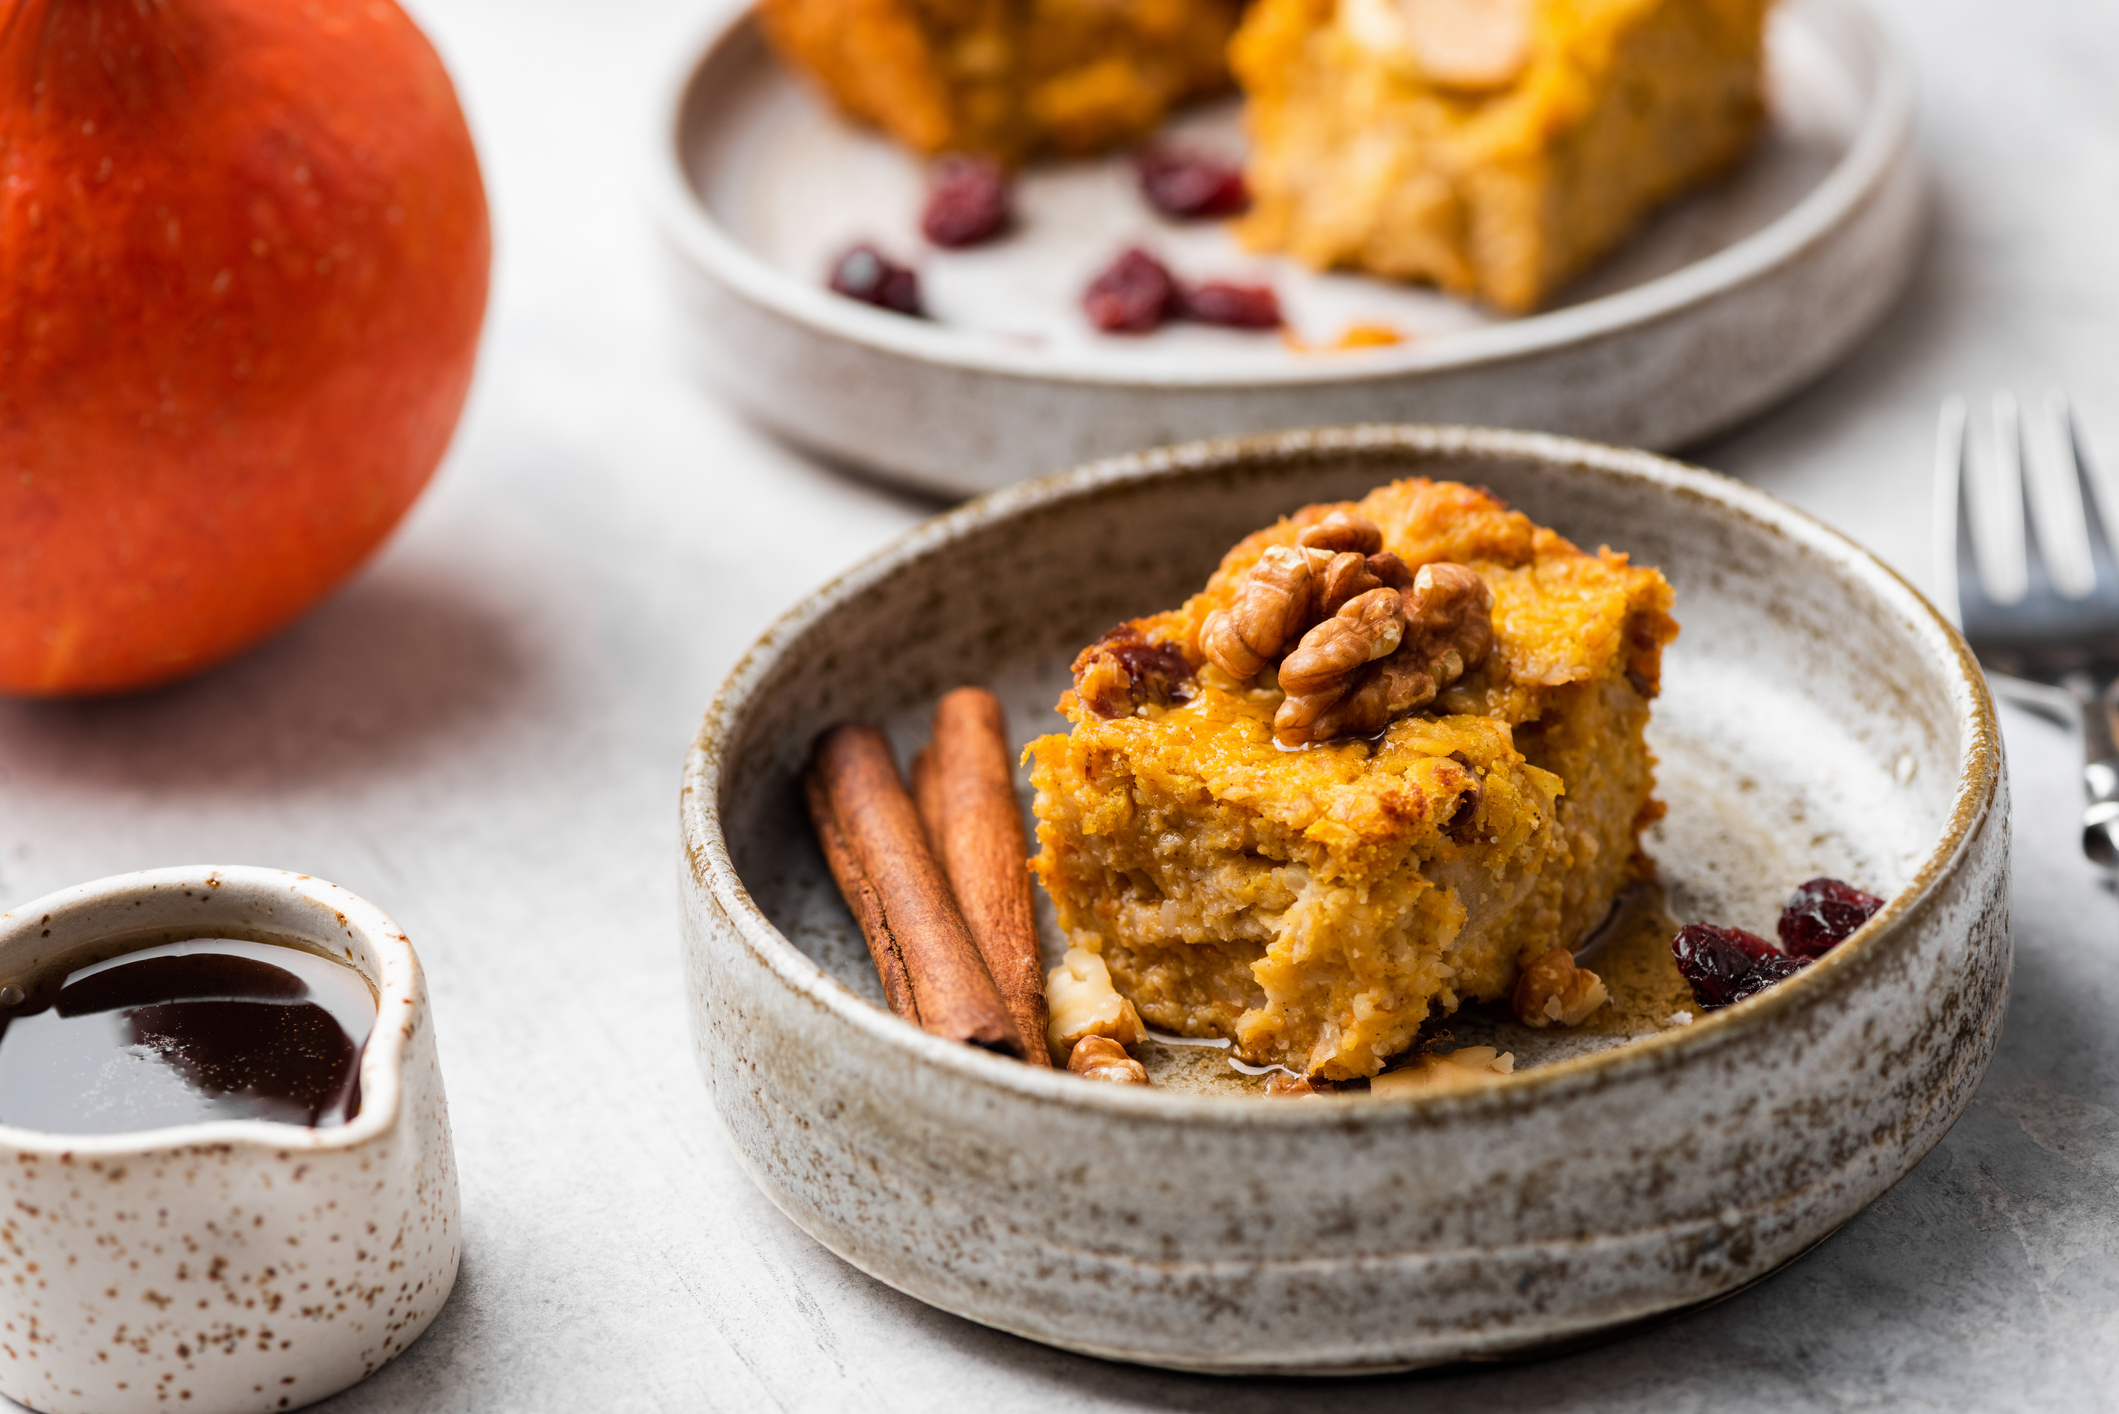 Picked your pumpkin and don't know what to do with them? This weekend's baking class will teach you a tasty new recipe.